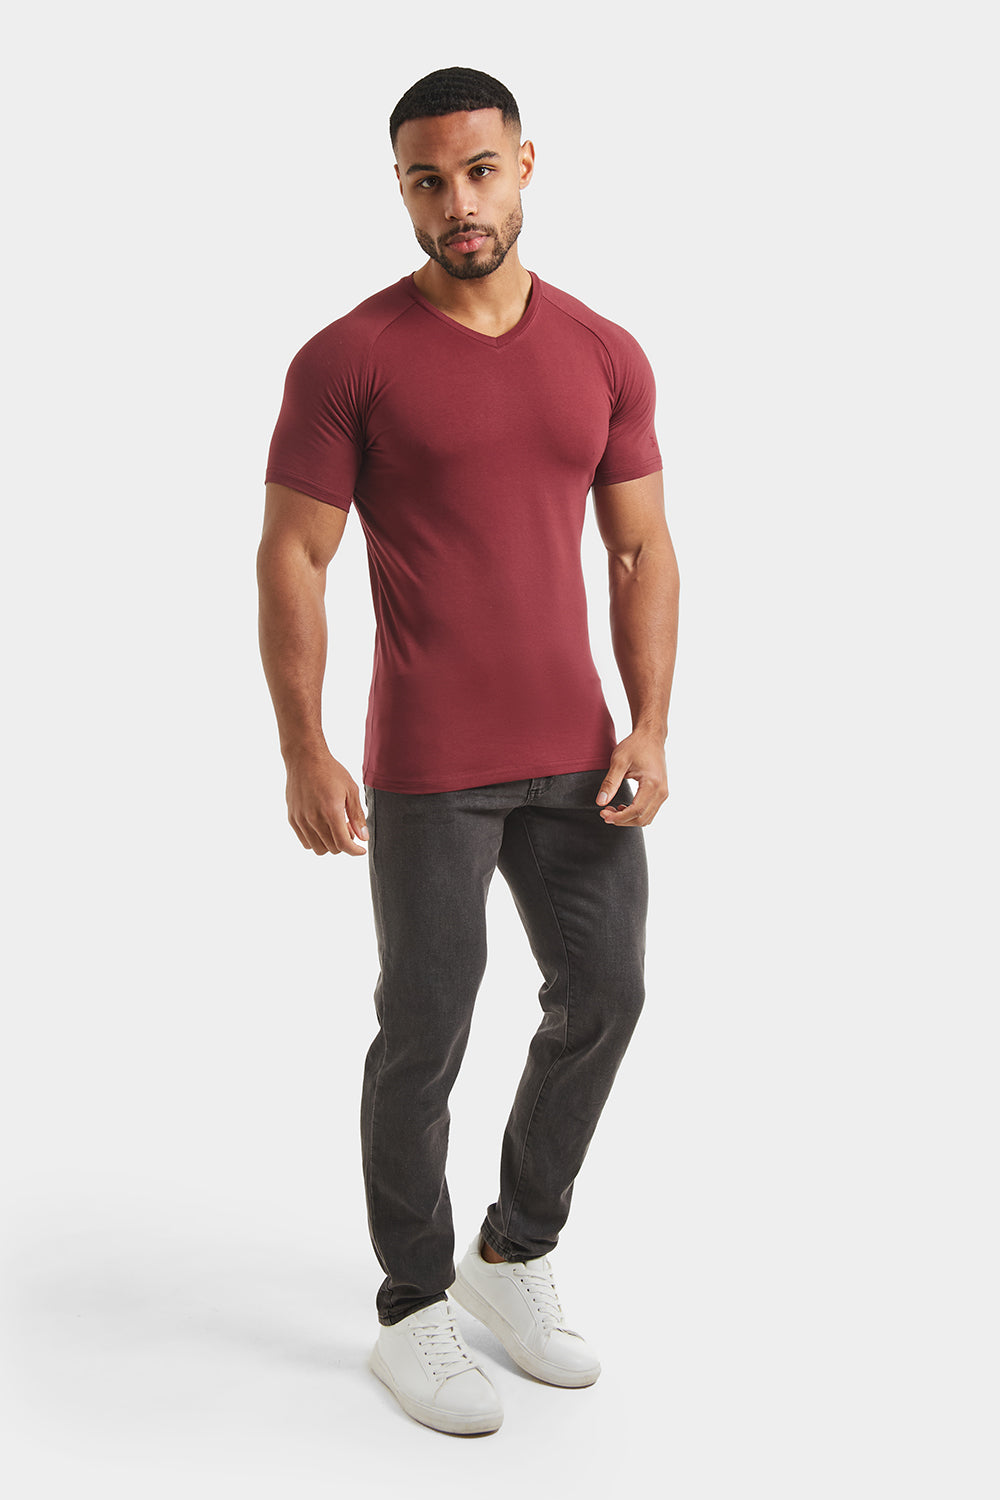 Premium Muscle Fit V-Neck in Burgundy - TAILORED ATHLETE - ROW